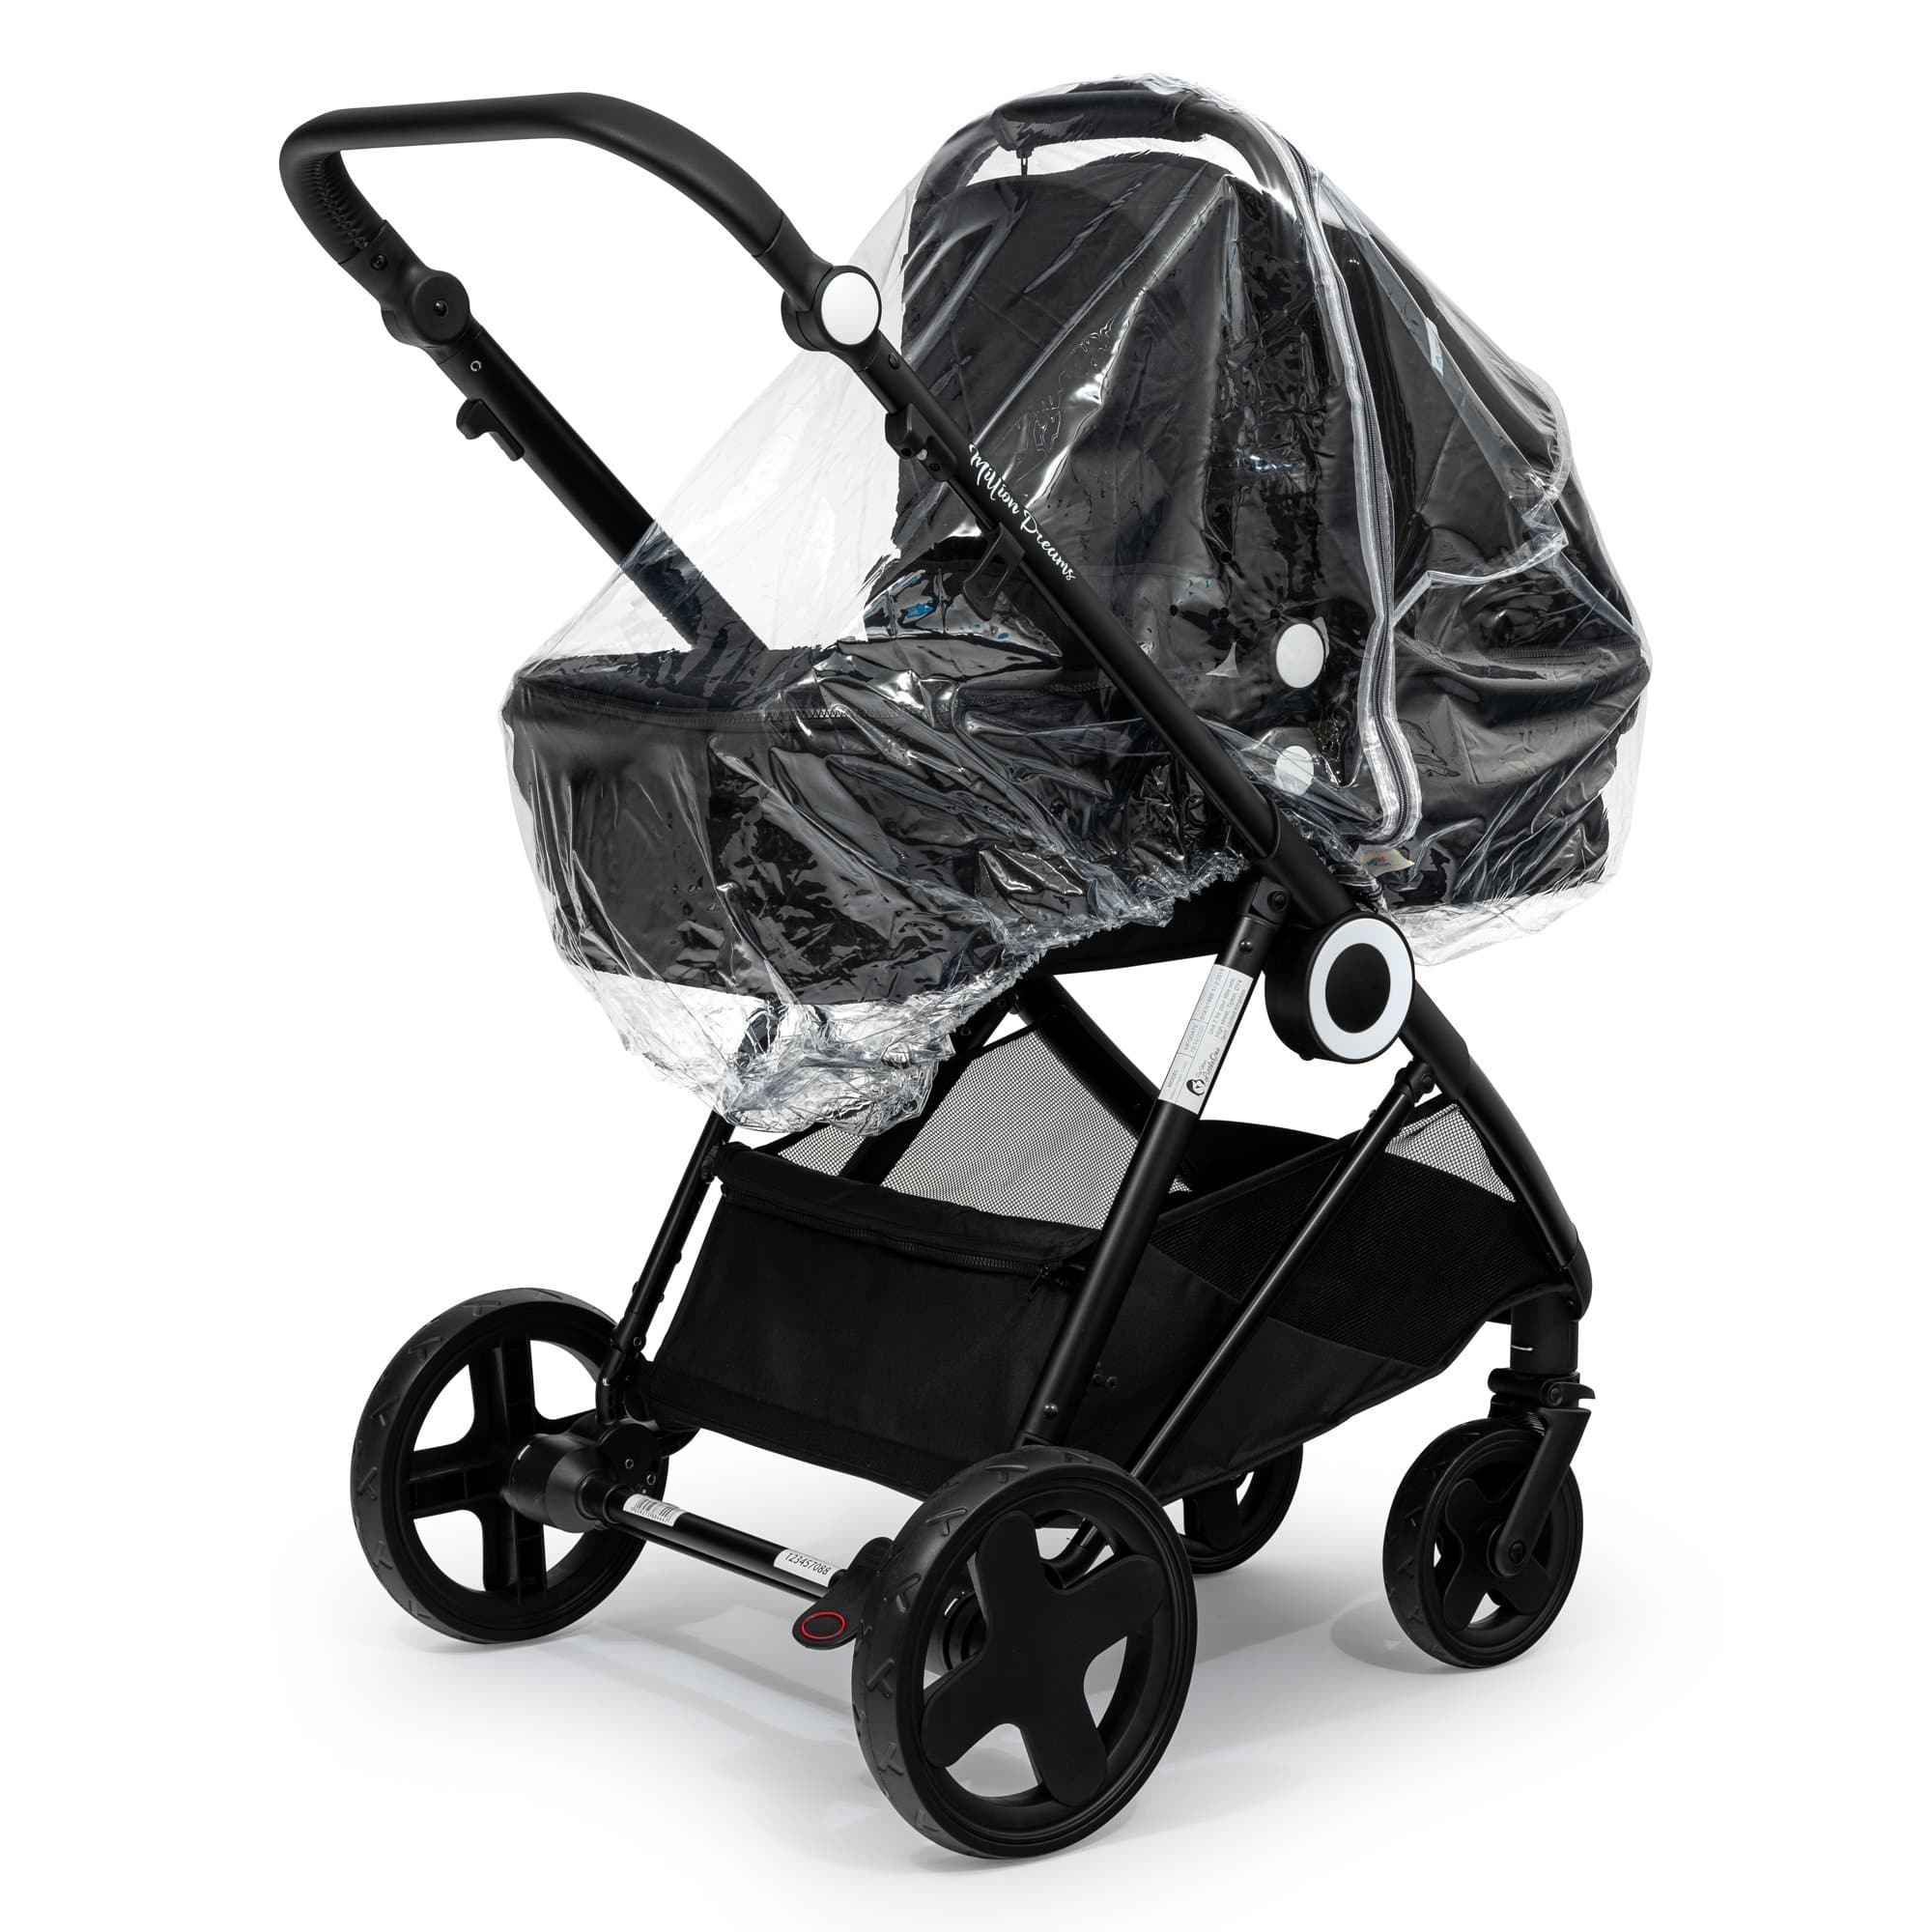 2 in 1 Rain Cover Compatible with Firstwheels - Fits All Models - For Your Little One